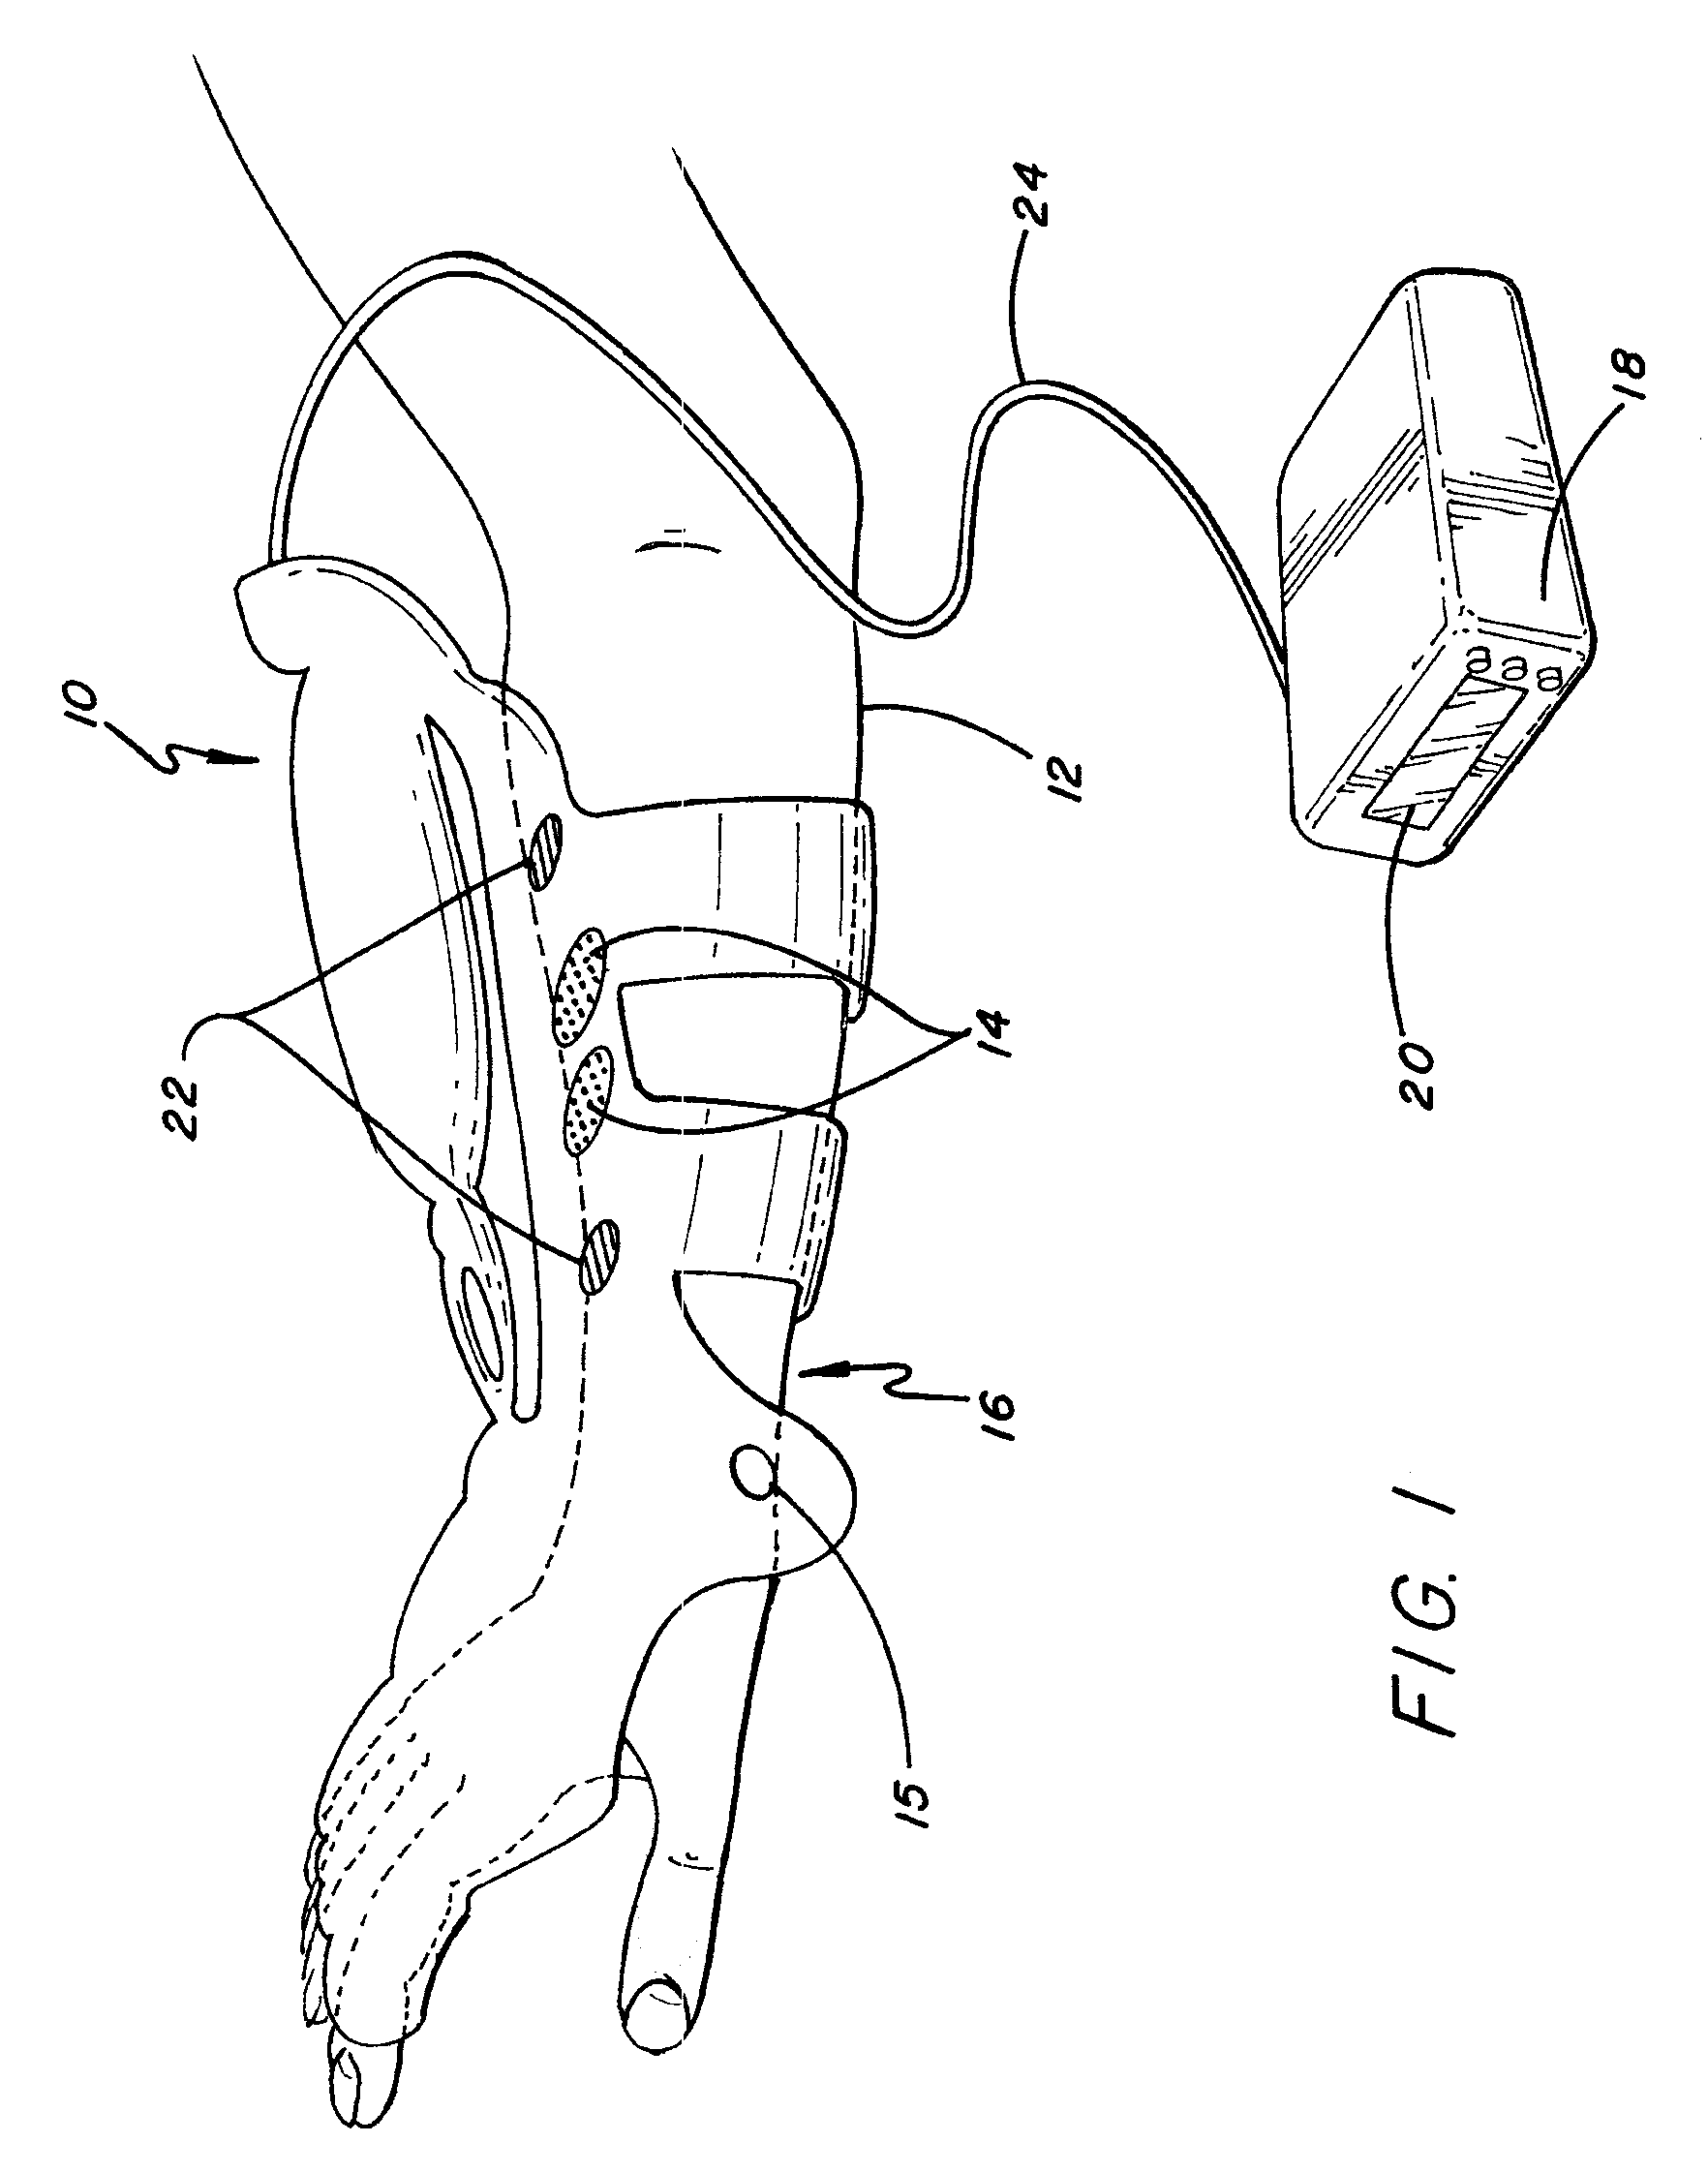 System and method for neuromuscular reeducation